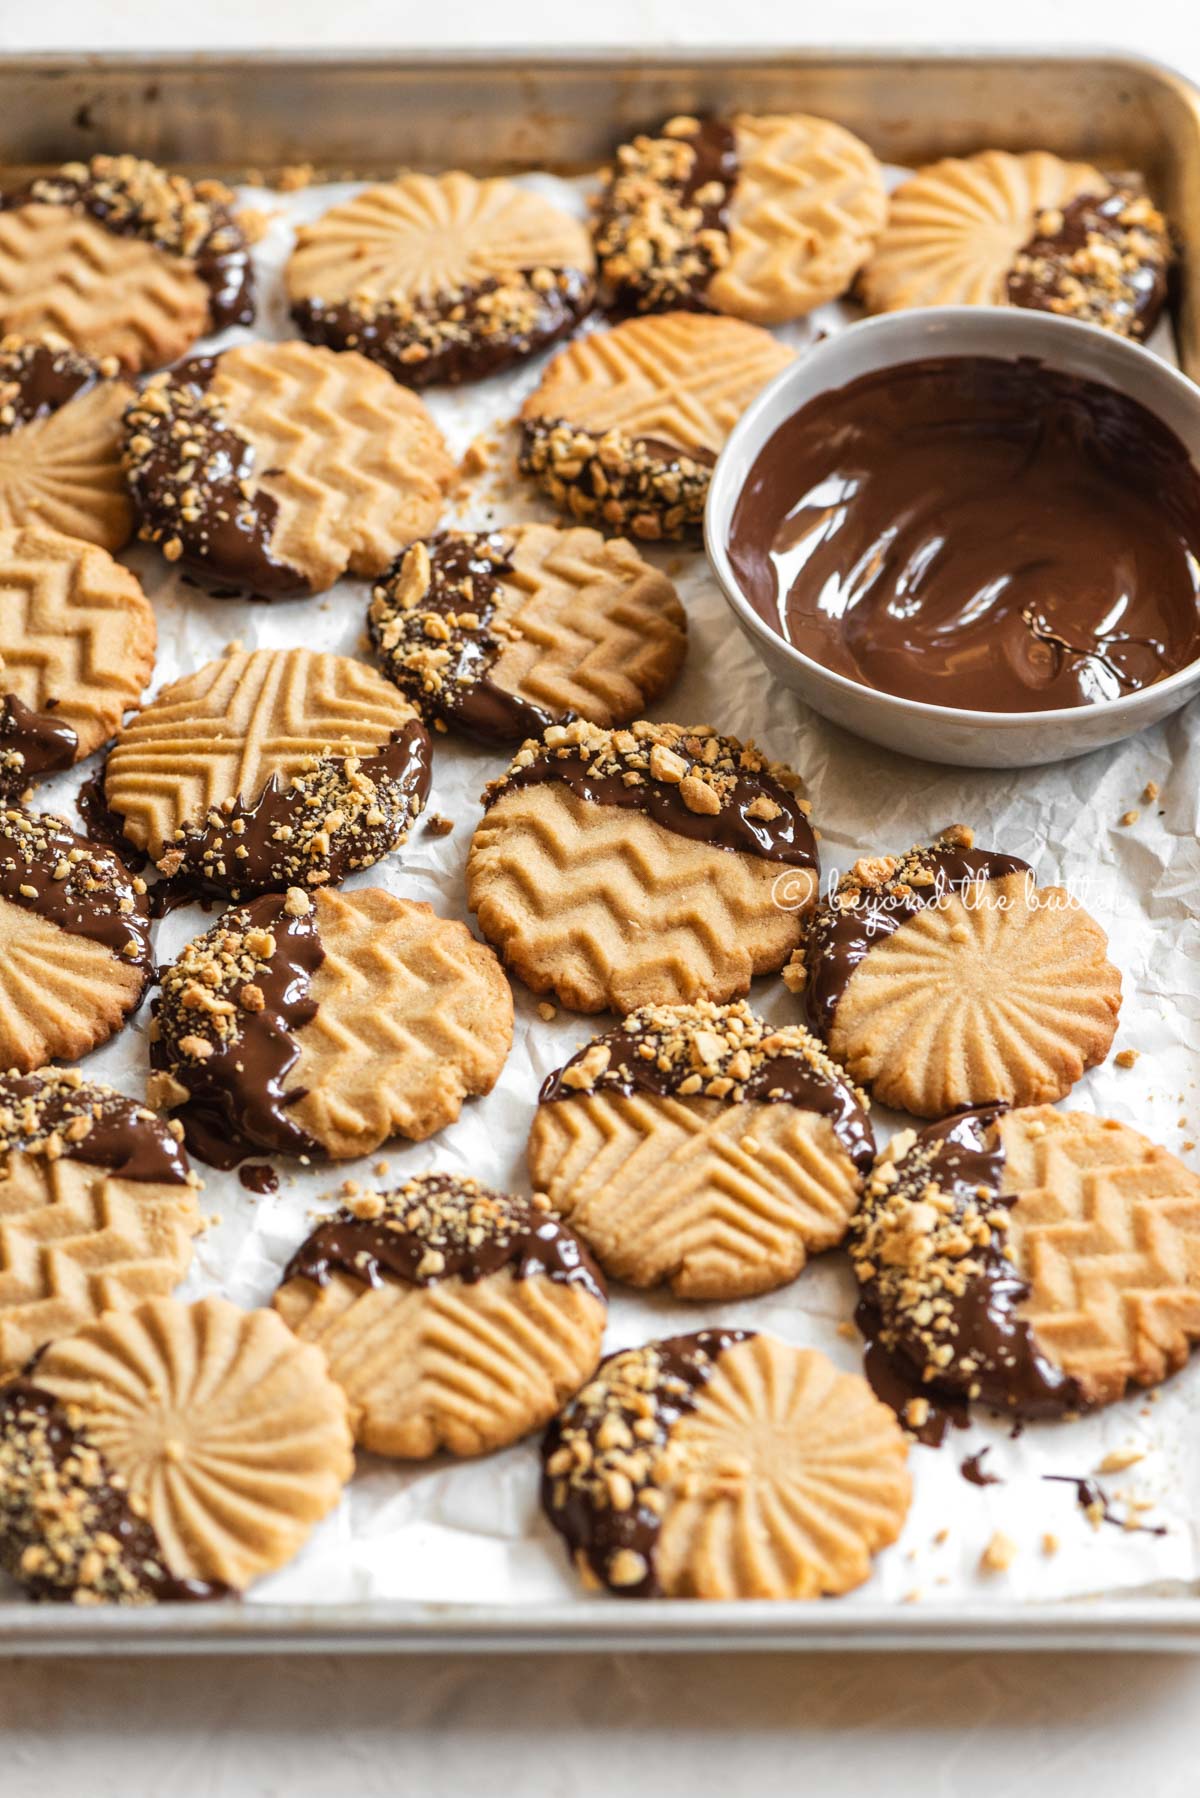 Baking sheet with randomly placed chocolate dipped peanut butter cookies with bowl of chocolate nearby | All Images © Beyond the Butter®